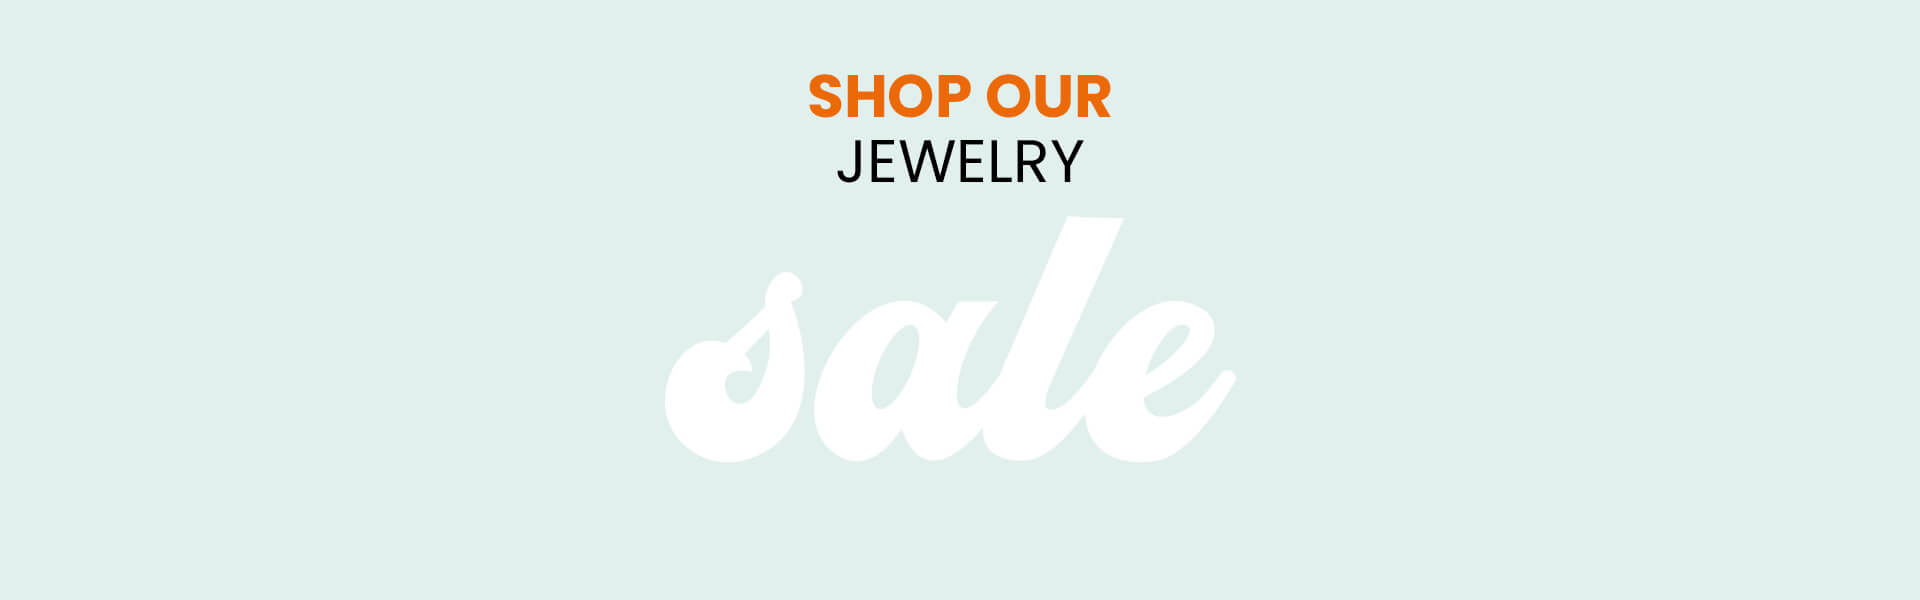 shop our jewelry sale